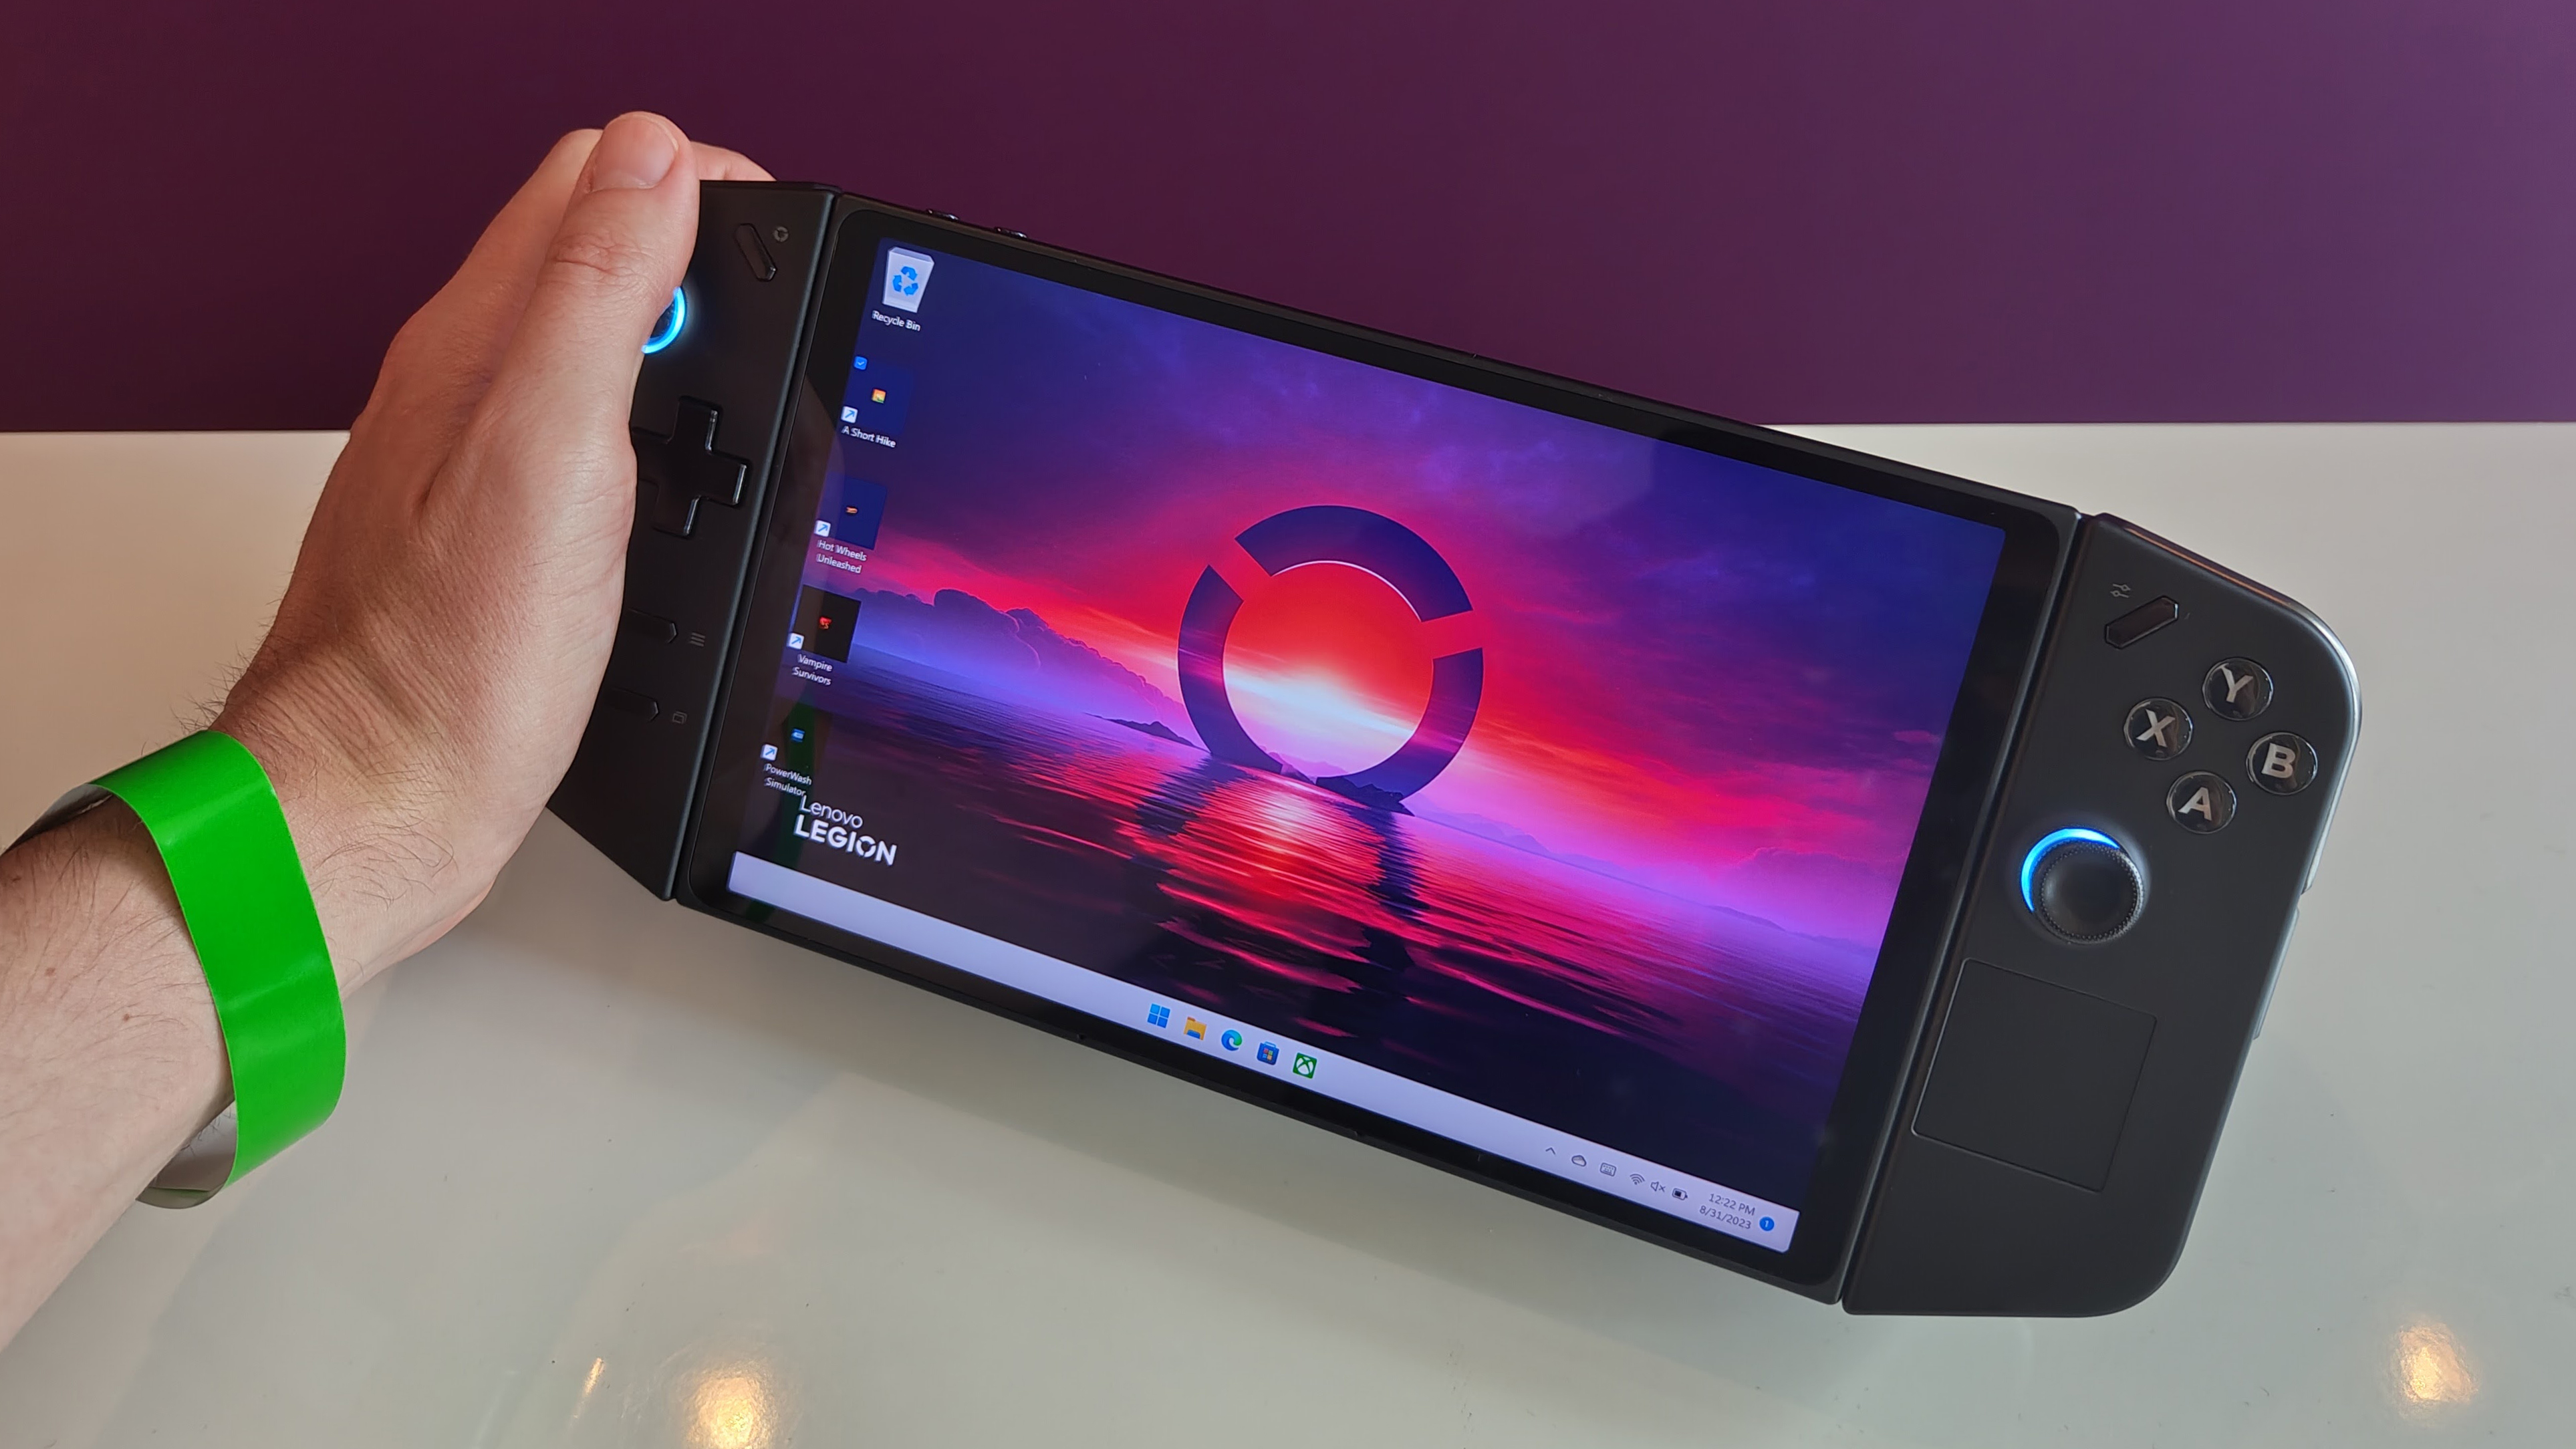 Lenovo Legion Go review: Tablet-sized display gives this Windows